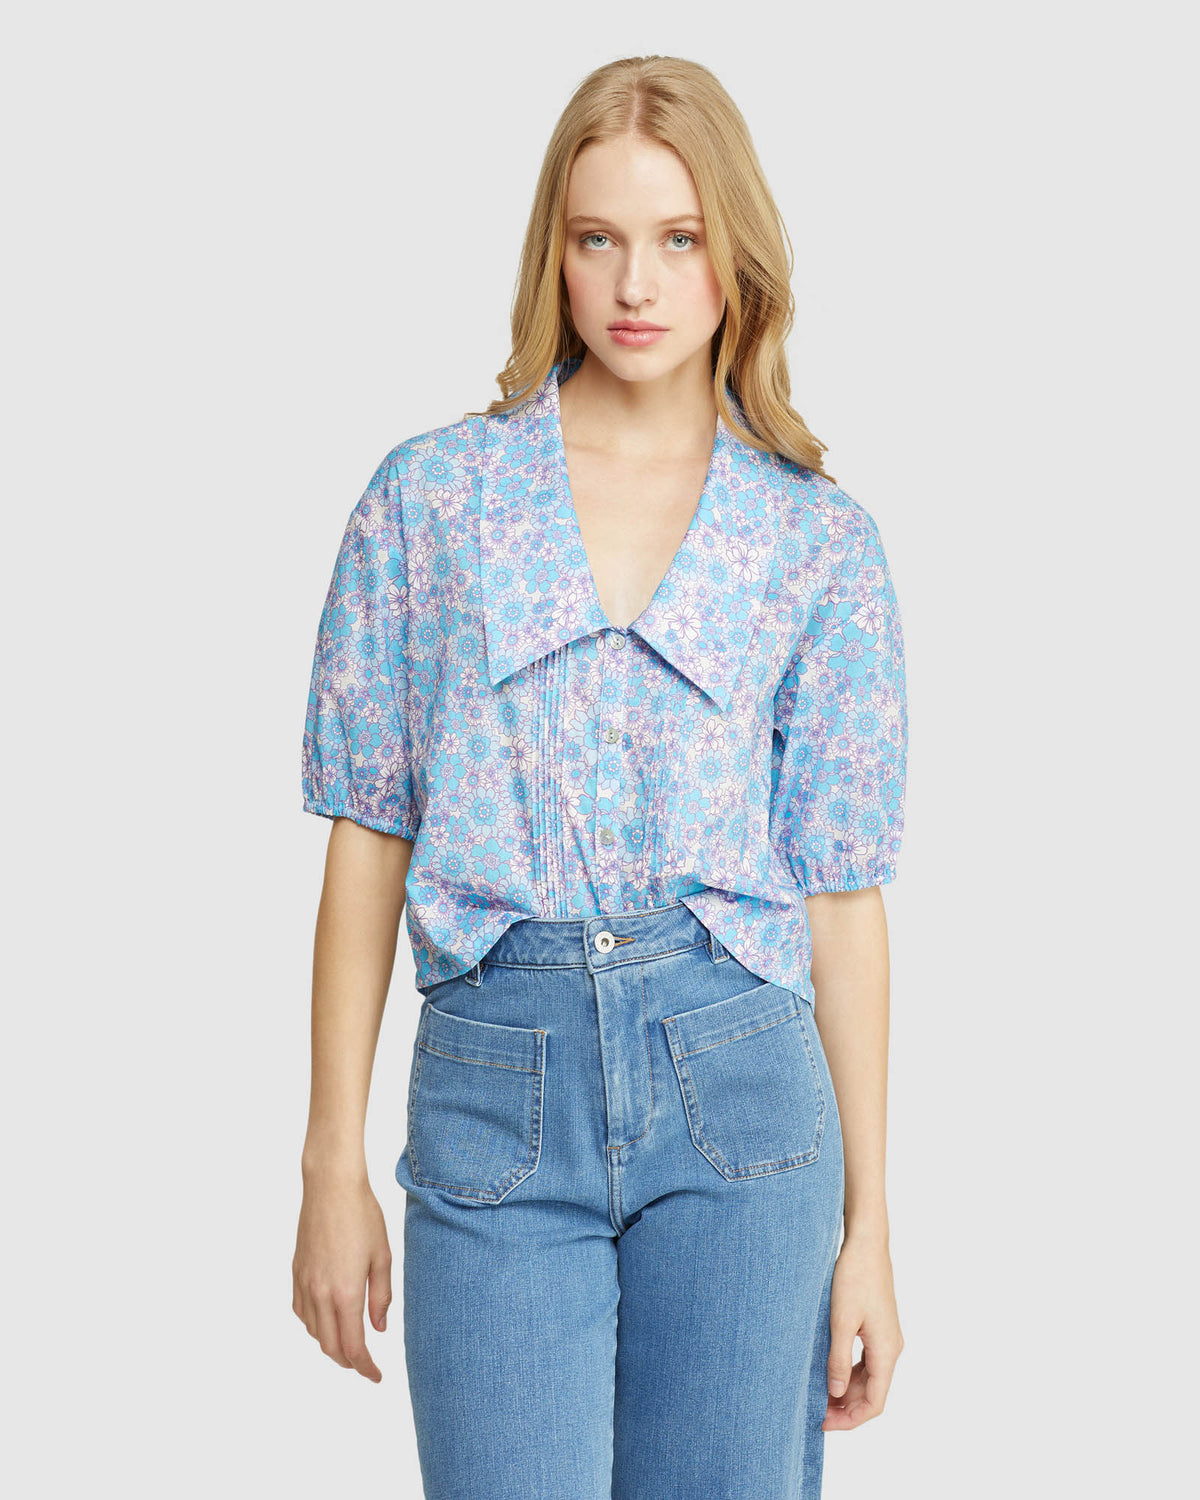 RALEIGH COTTON RETRO FLORAL TOP WOMENS TOPS